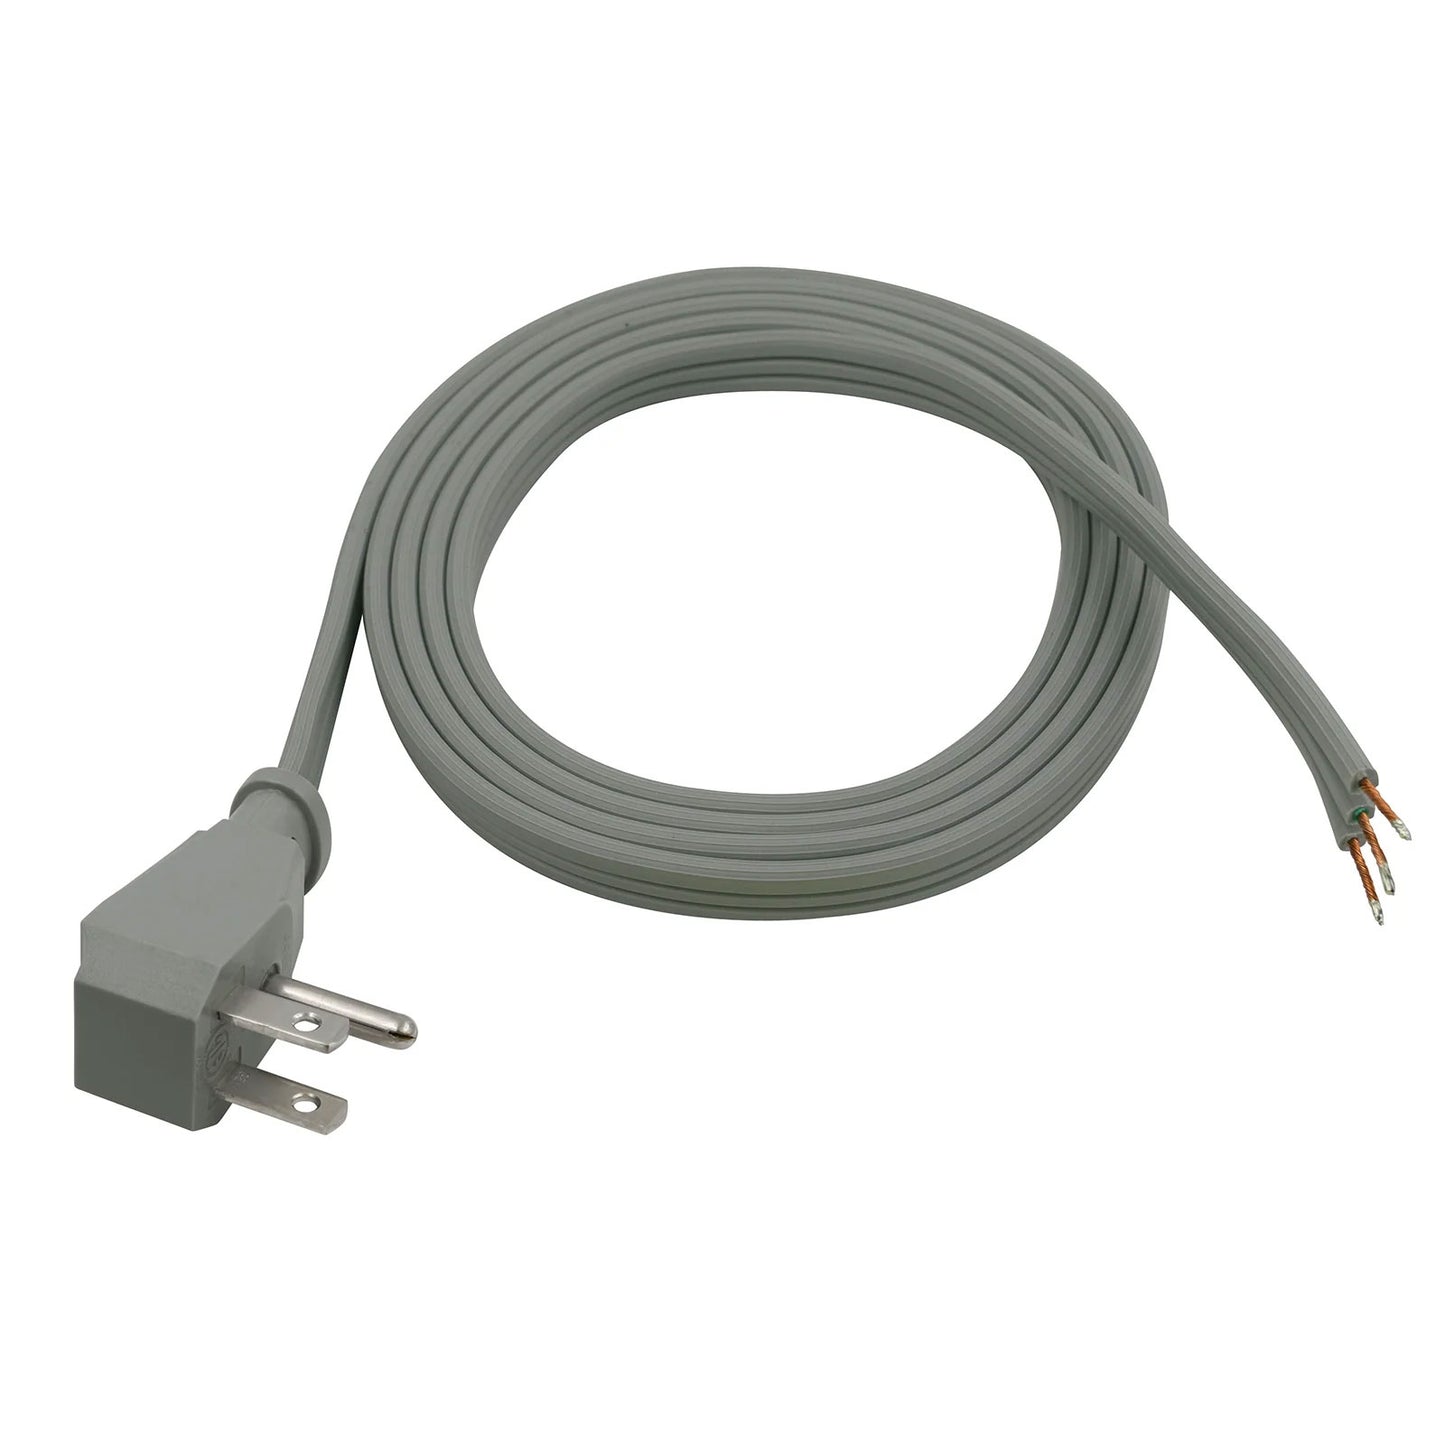 PS210606 - Power Supply Pigtail Cord with Right Angle Plug - Gray- 6 Ft